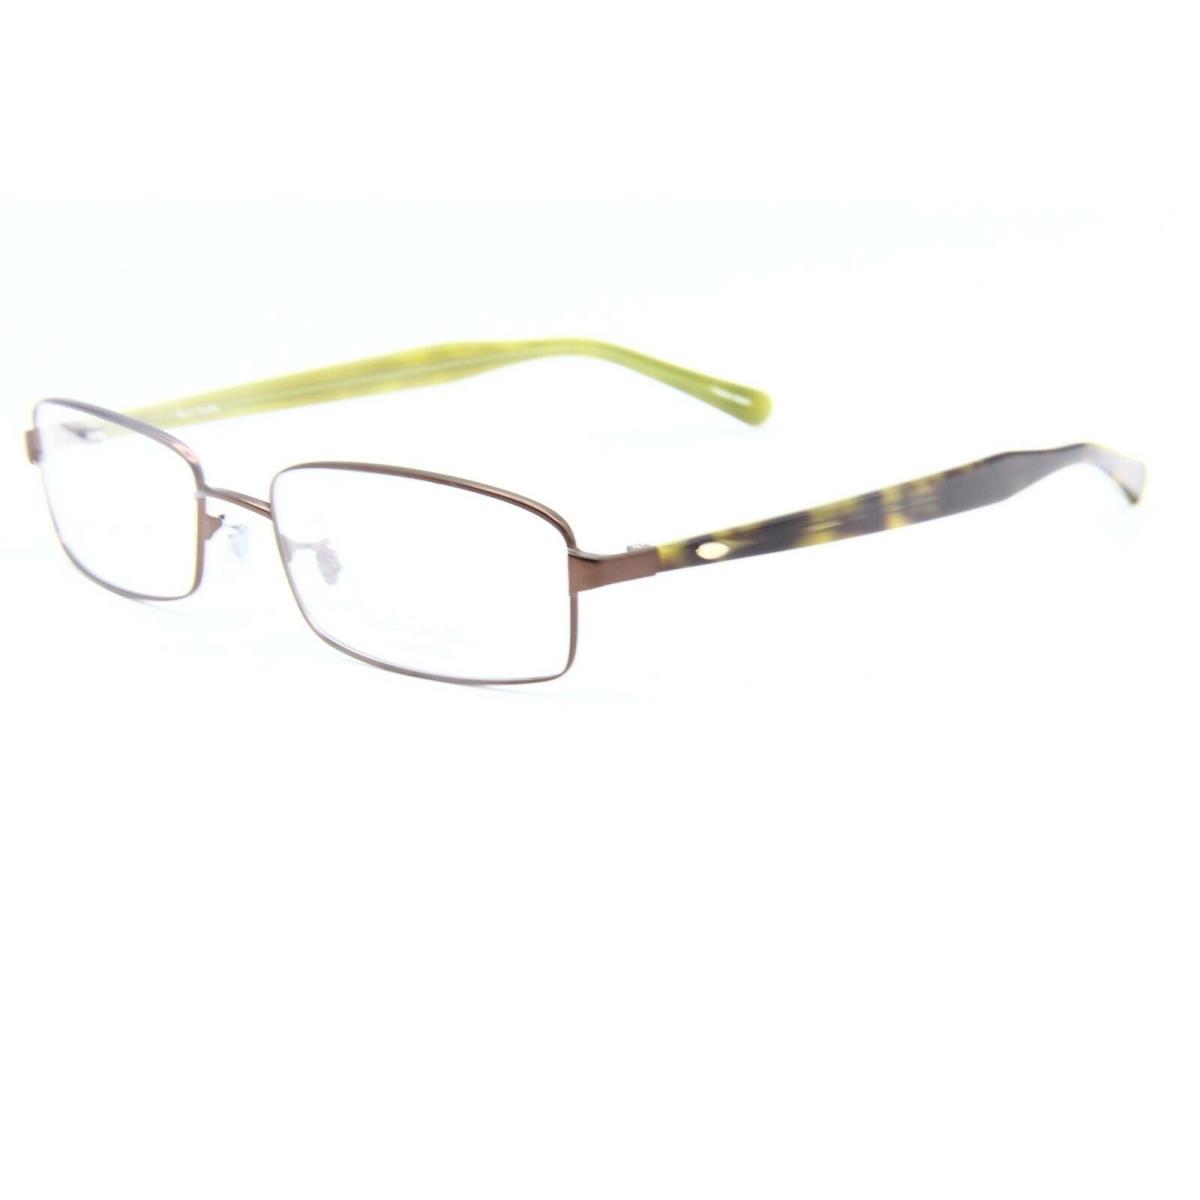 Paul Smith PS-1009 Cho/oace Brown Eyeglasses Frame RX 53-17